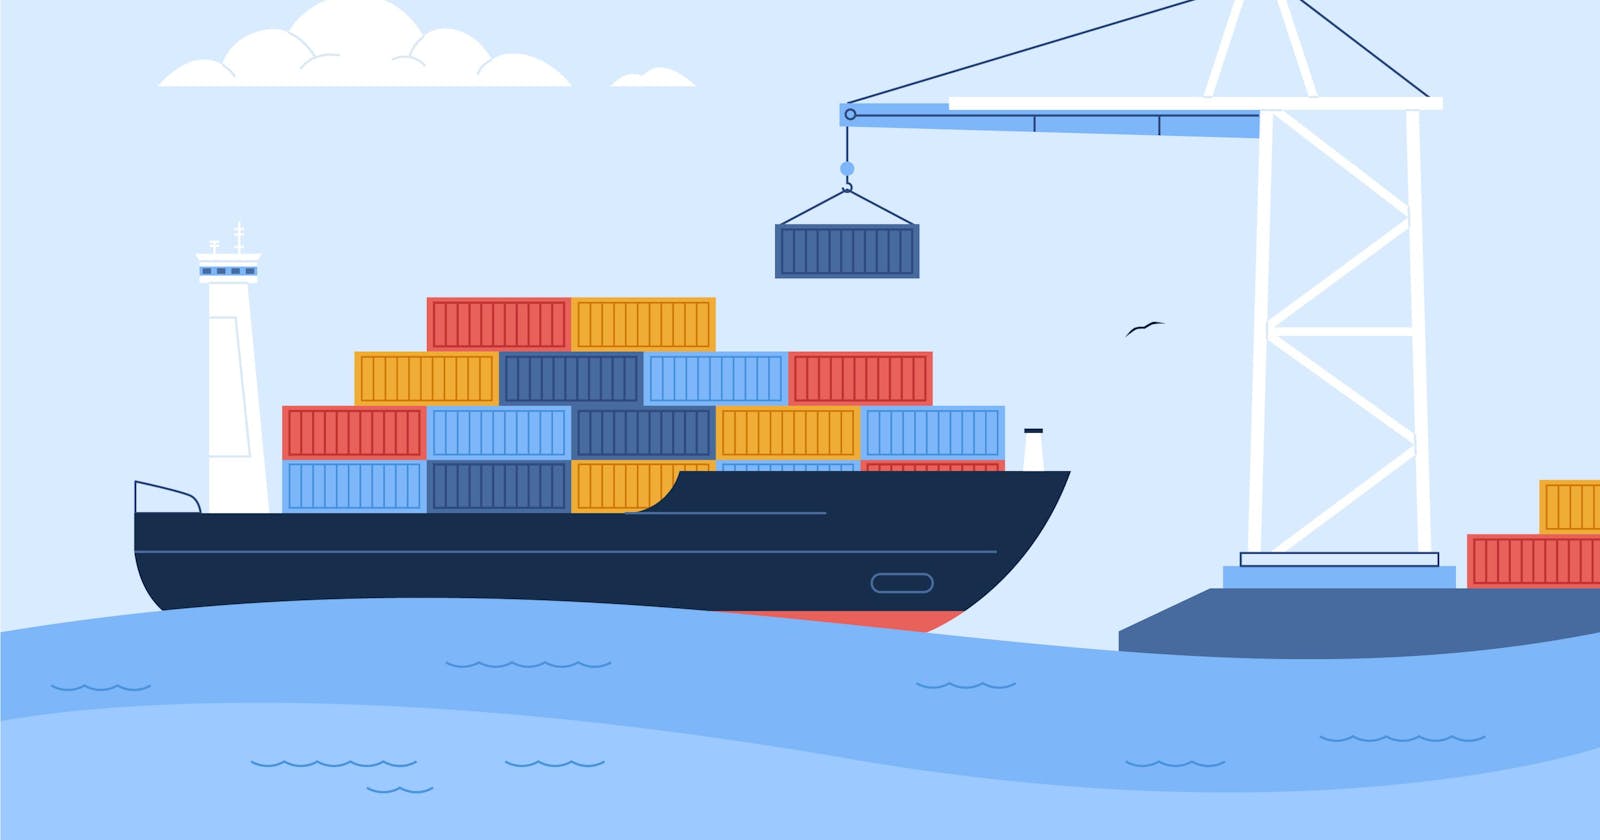 Title: Docker: Simplifying Application Deployment and Management